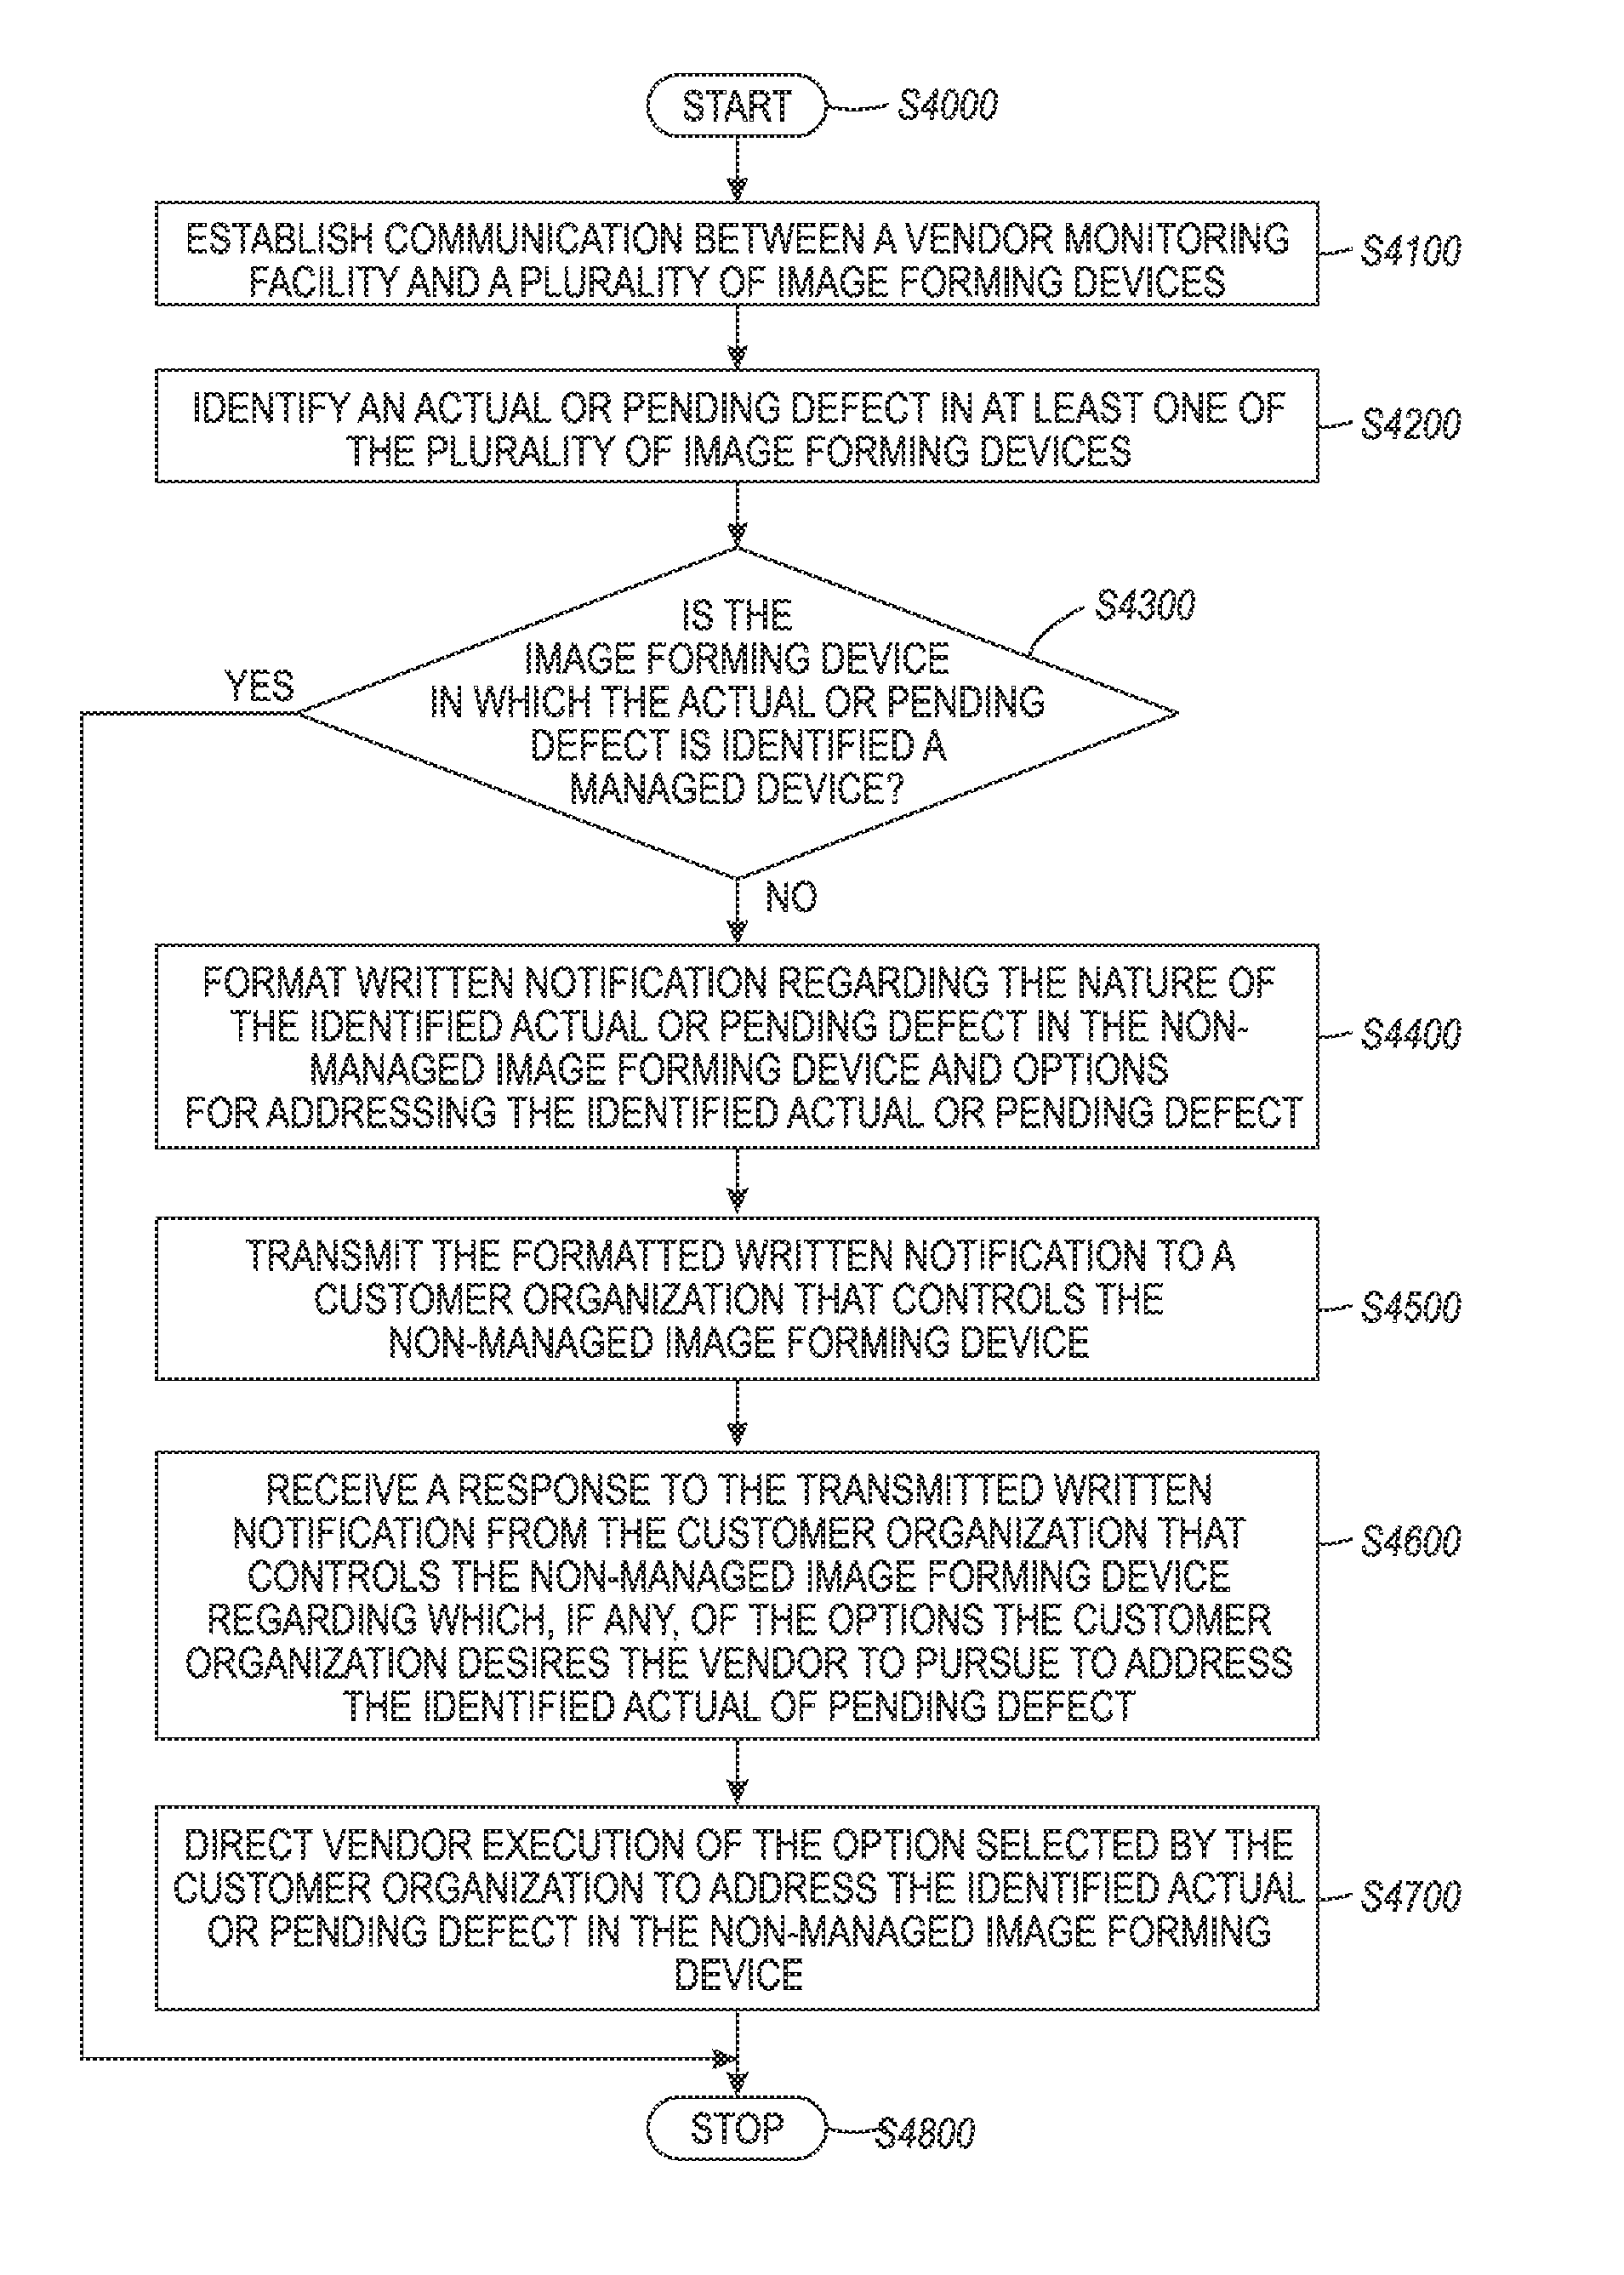 Systems and methods for implementing a supplies fulfillment opportunity for non-managed devices